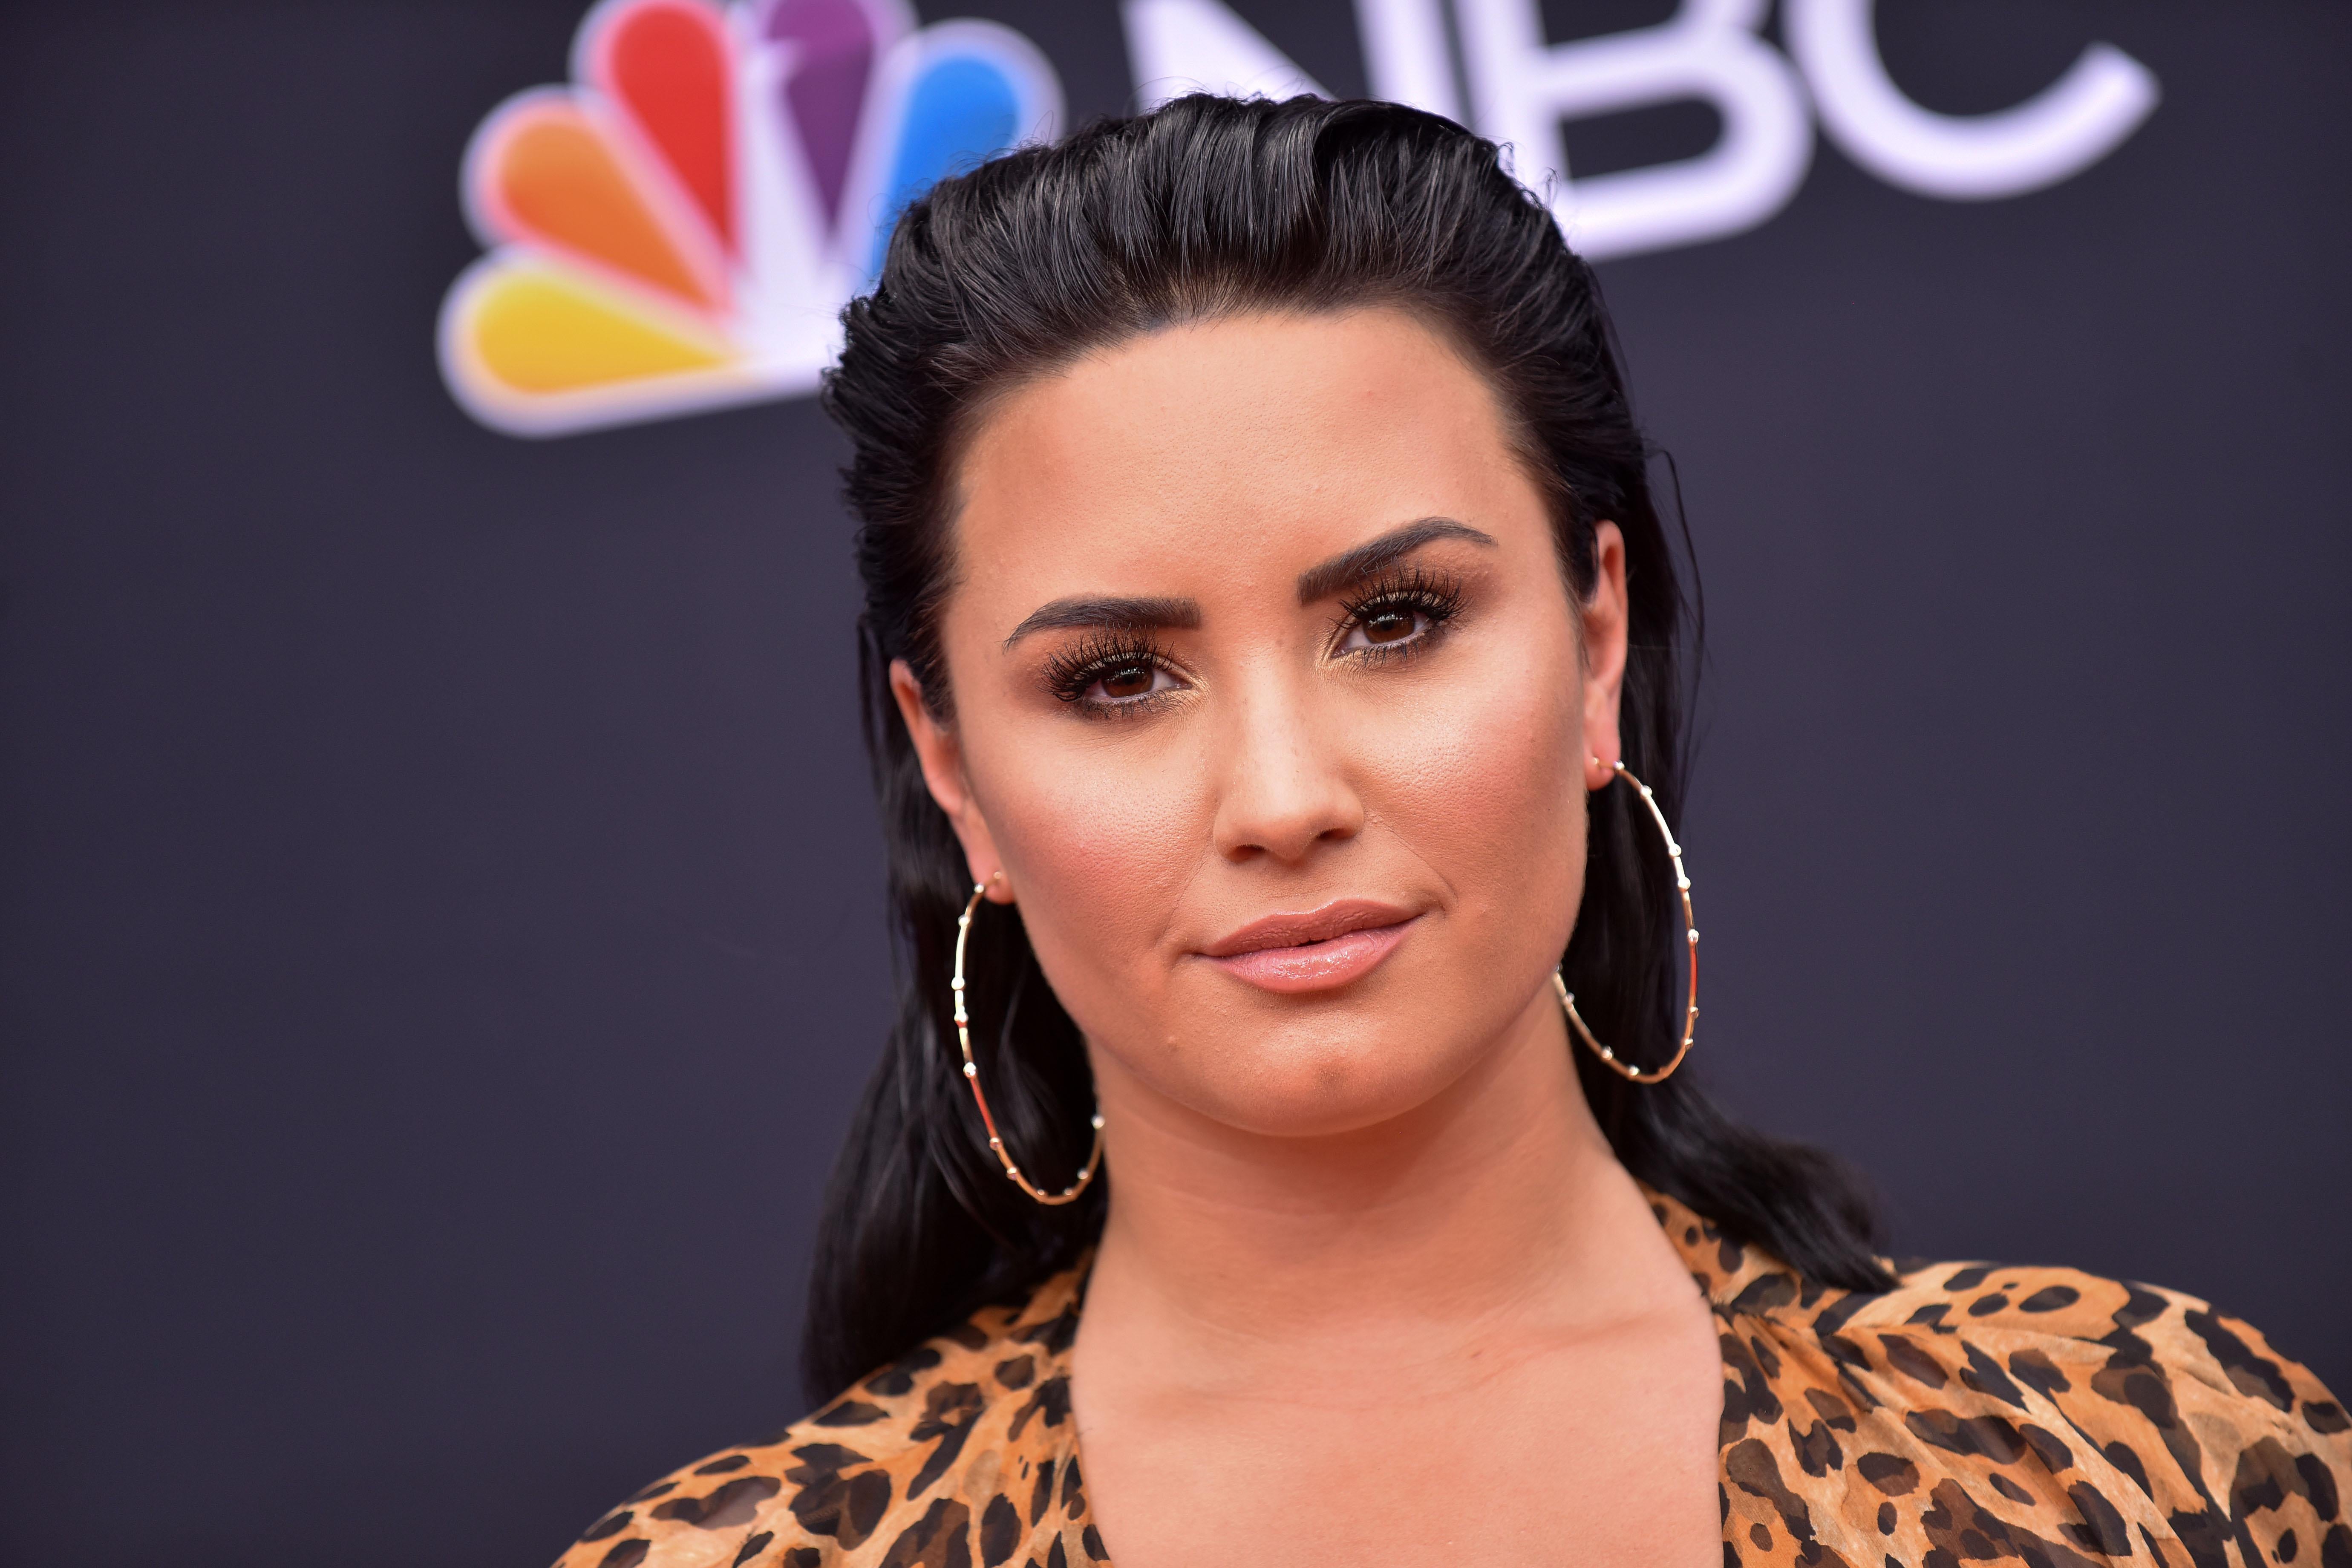 Demi Lovato on a red carpet in front of the NBC logo. She wears hoop earrings and leopard print.